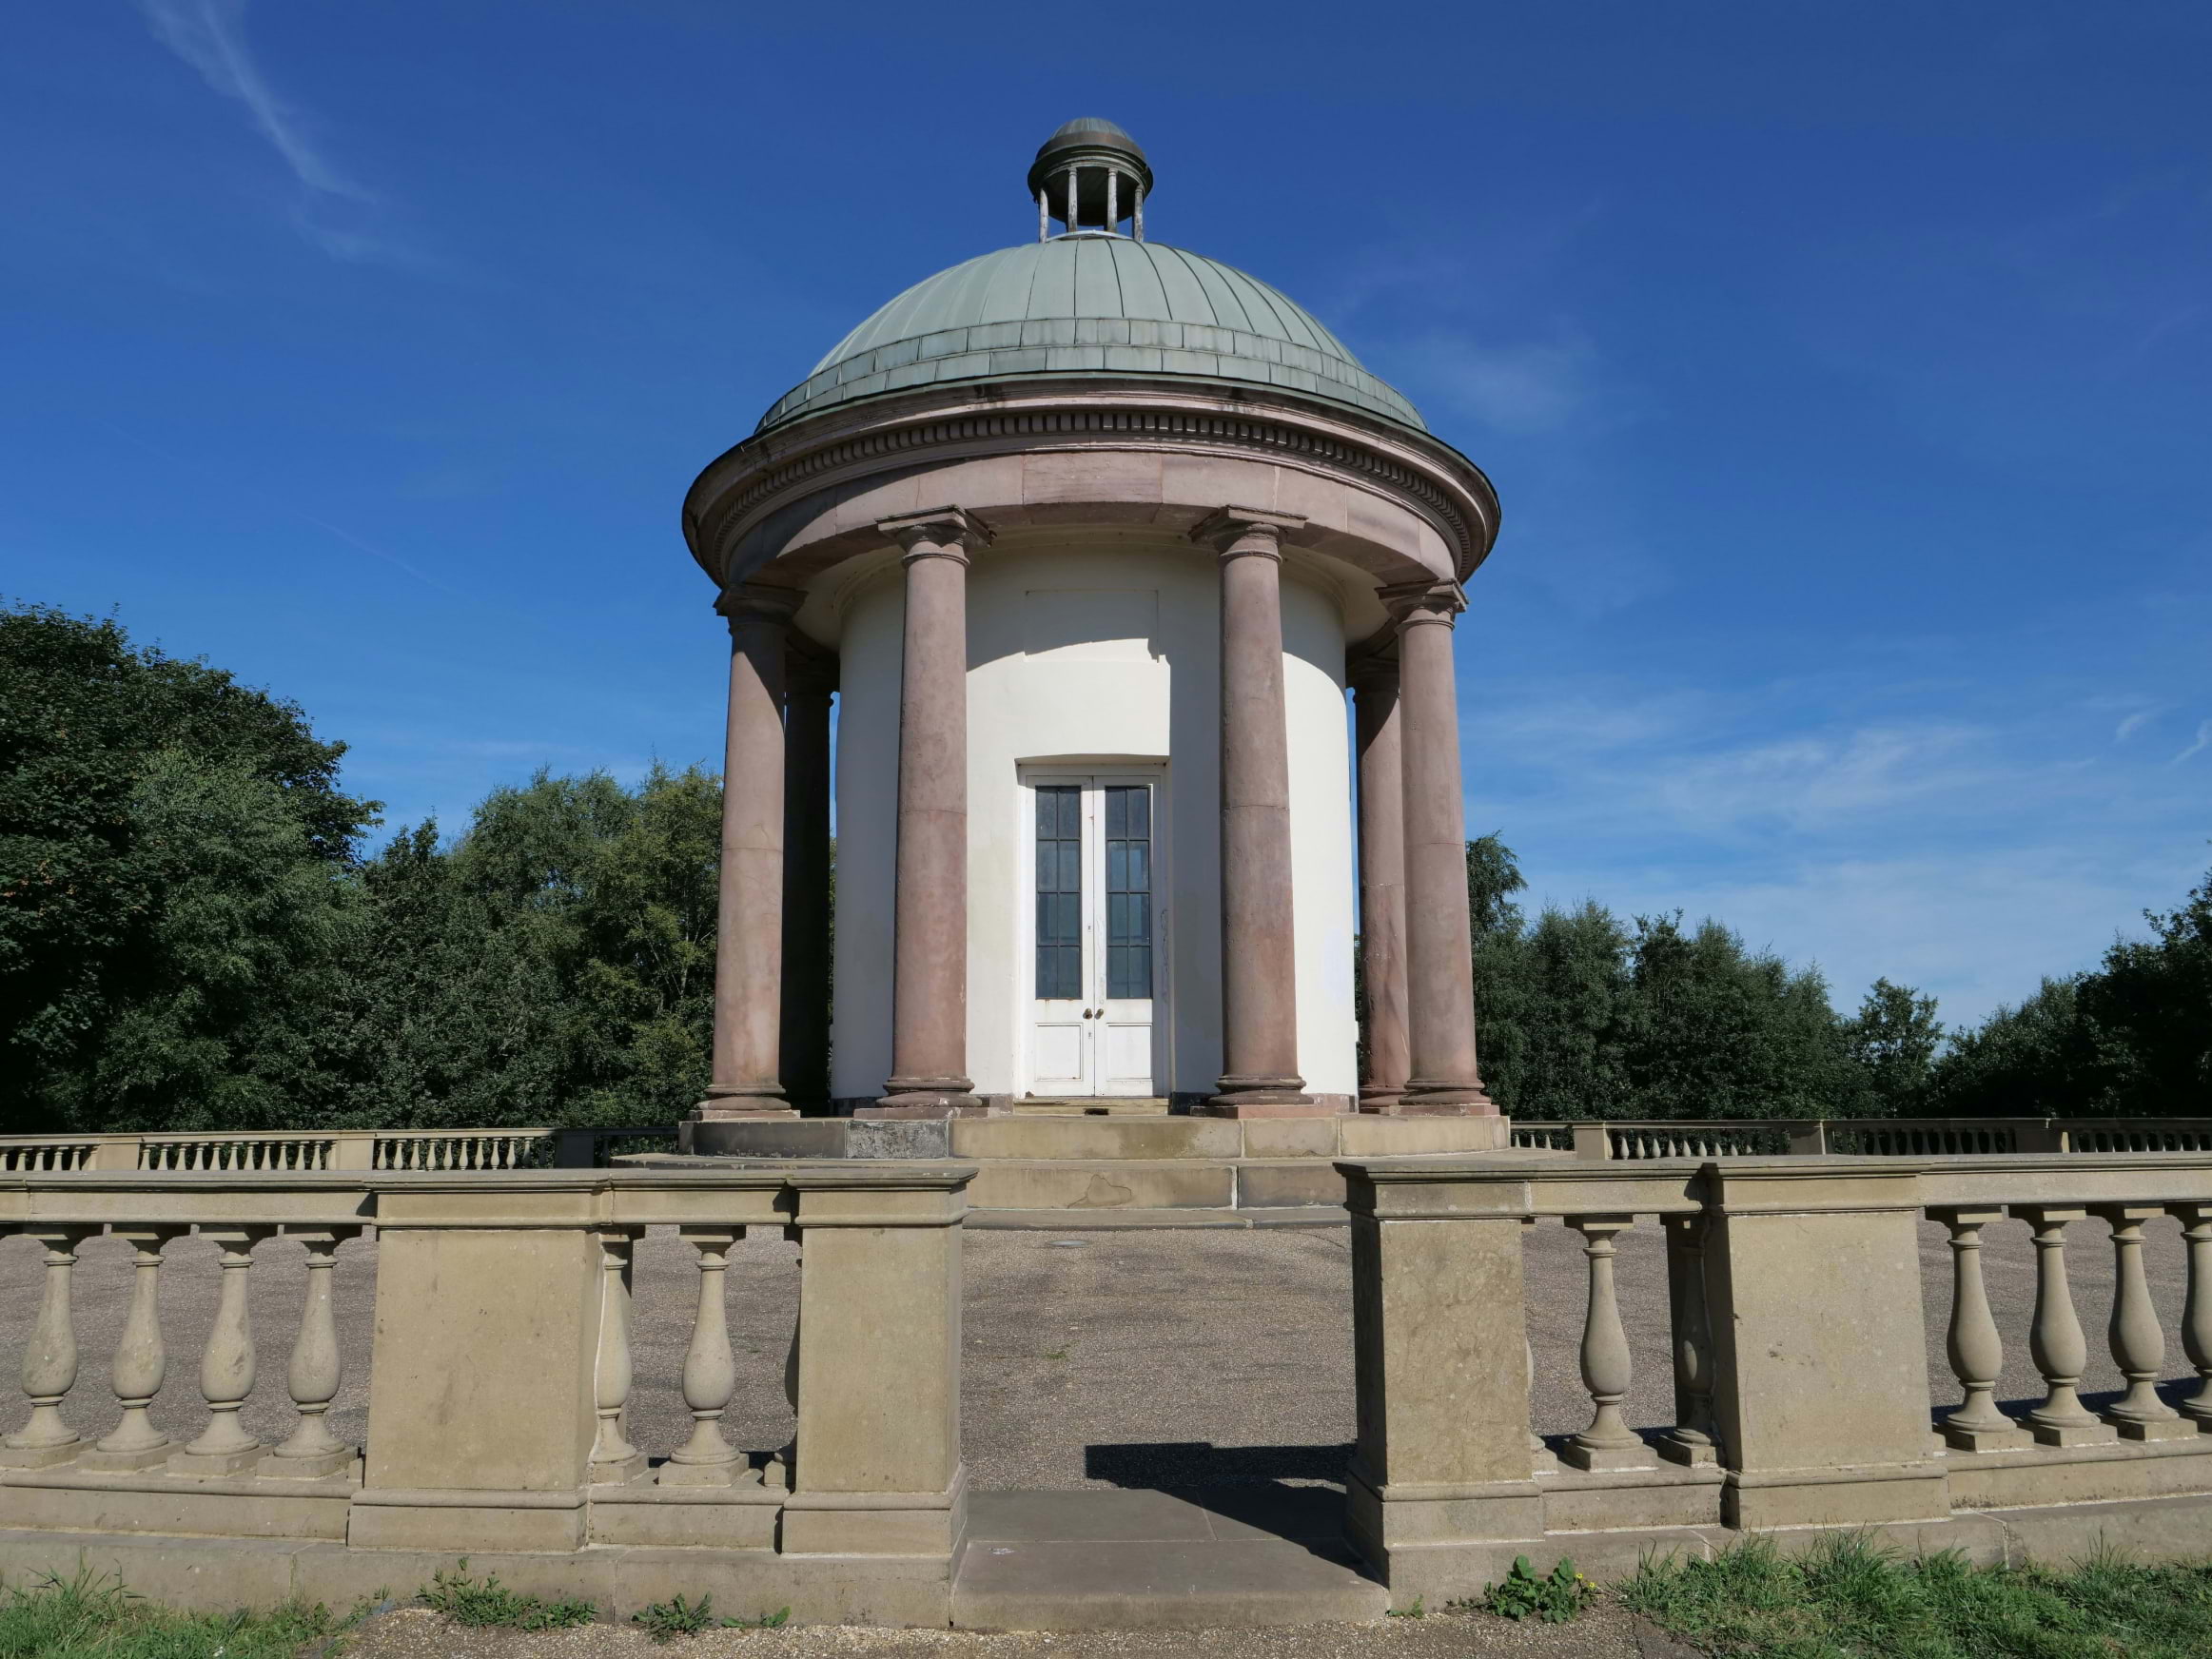 Sunol Water Temple in Heaton Park on a sunny day